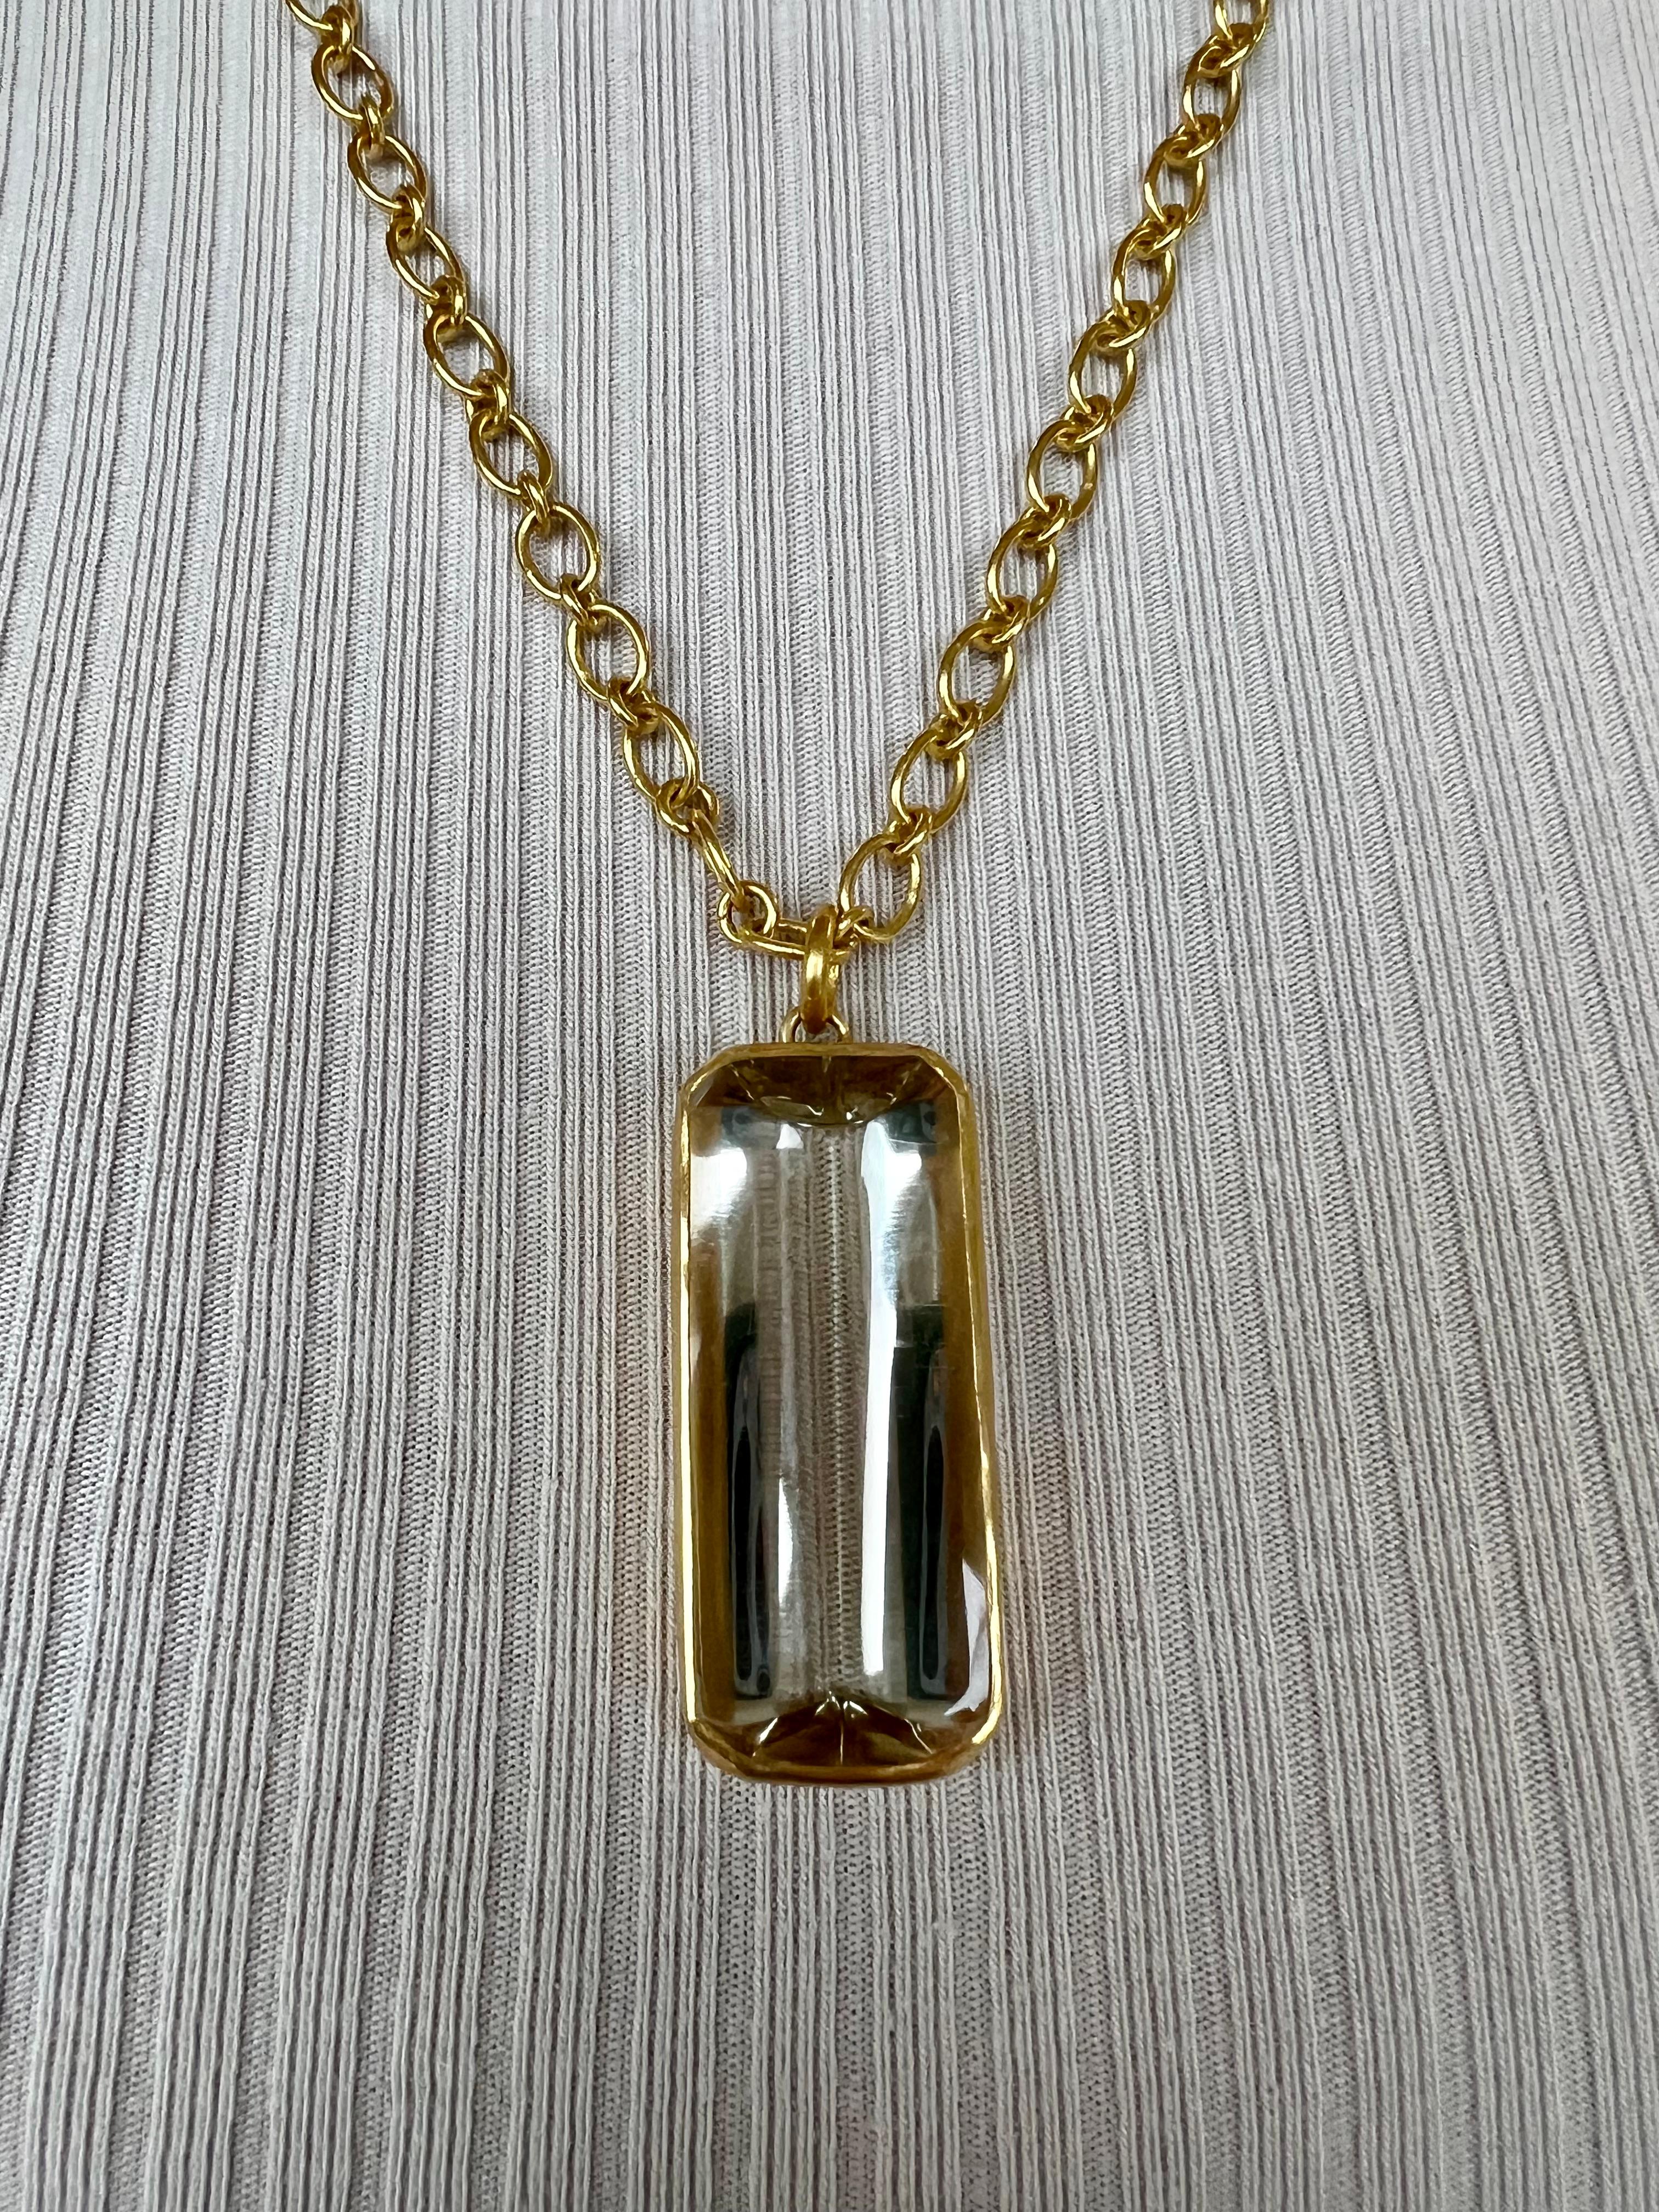 This beautiful large smoky Quartz crystal pendant is set in 22Karat gold.
History & lore:  Smoky Quartz is the national gem of Scotland, in Celtic cultures, Smoky Quartz was sacred to the Druids.
The pendant measures 40 millimeters X 17 millimeters